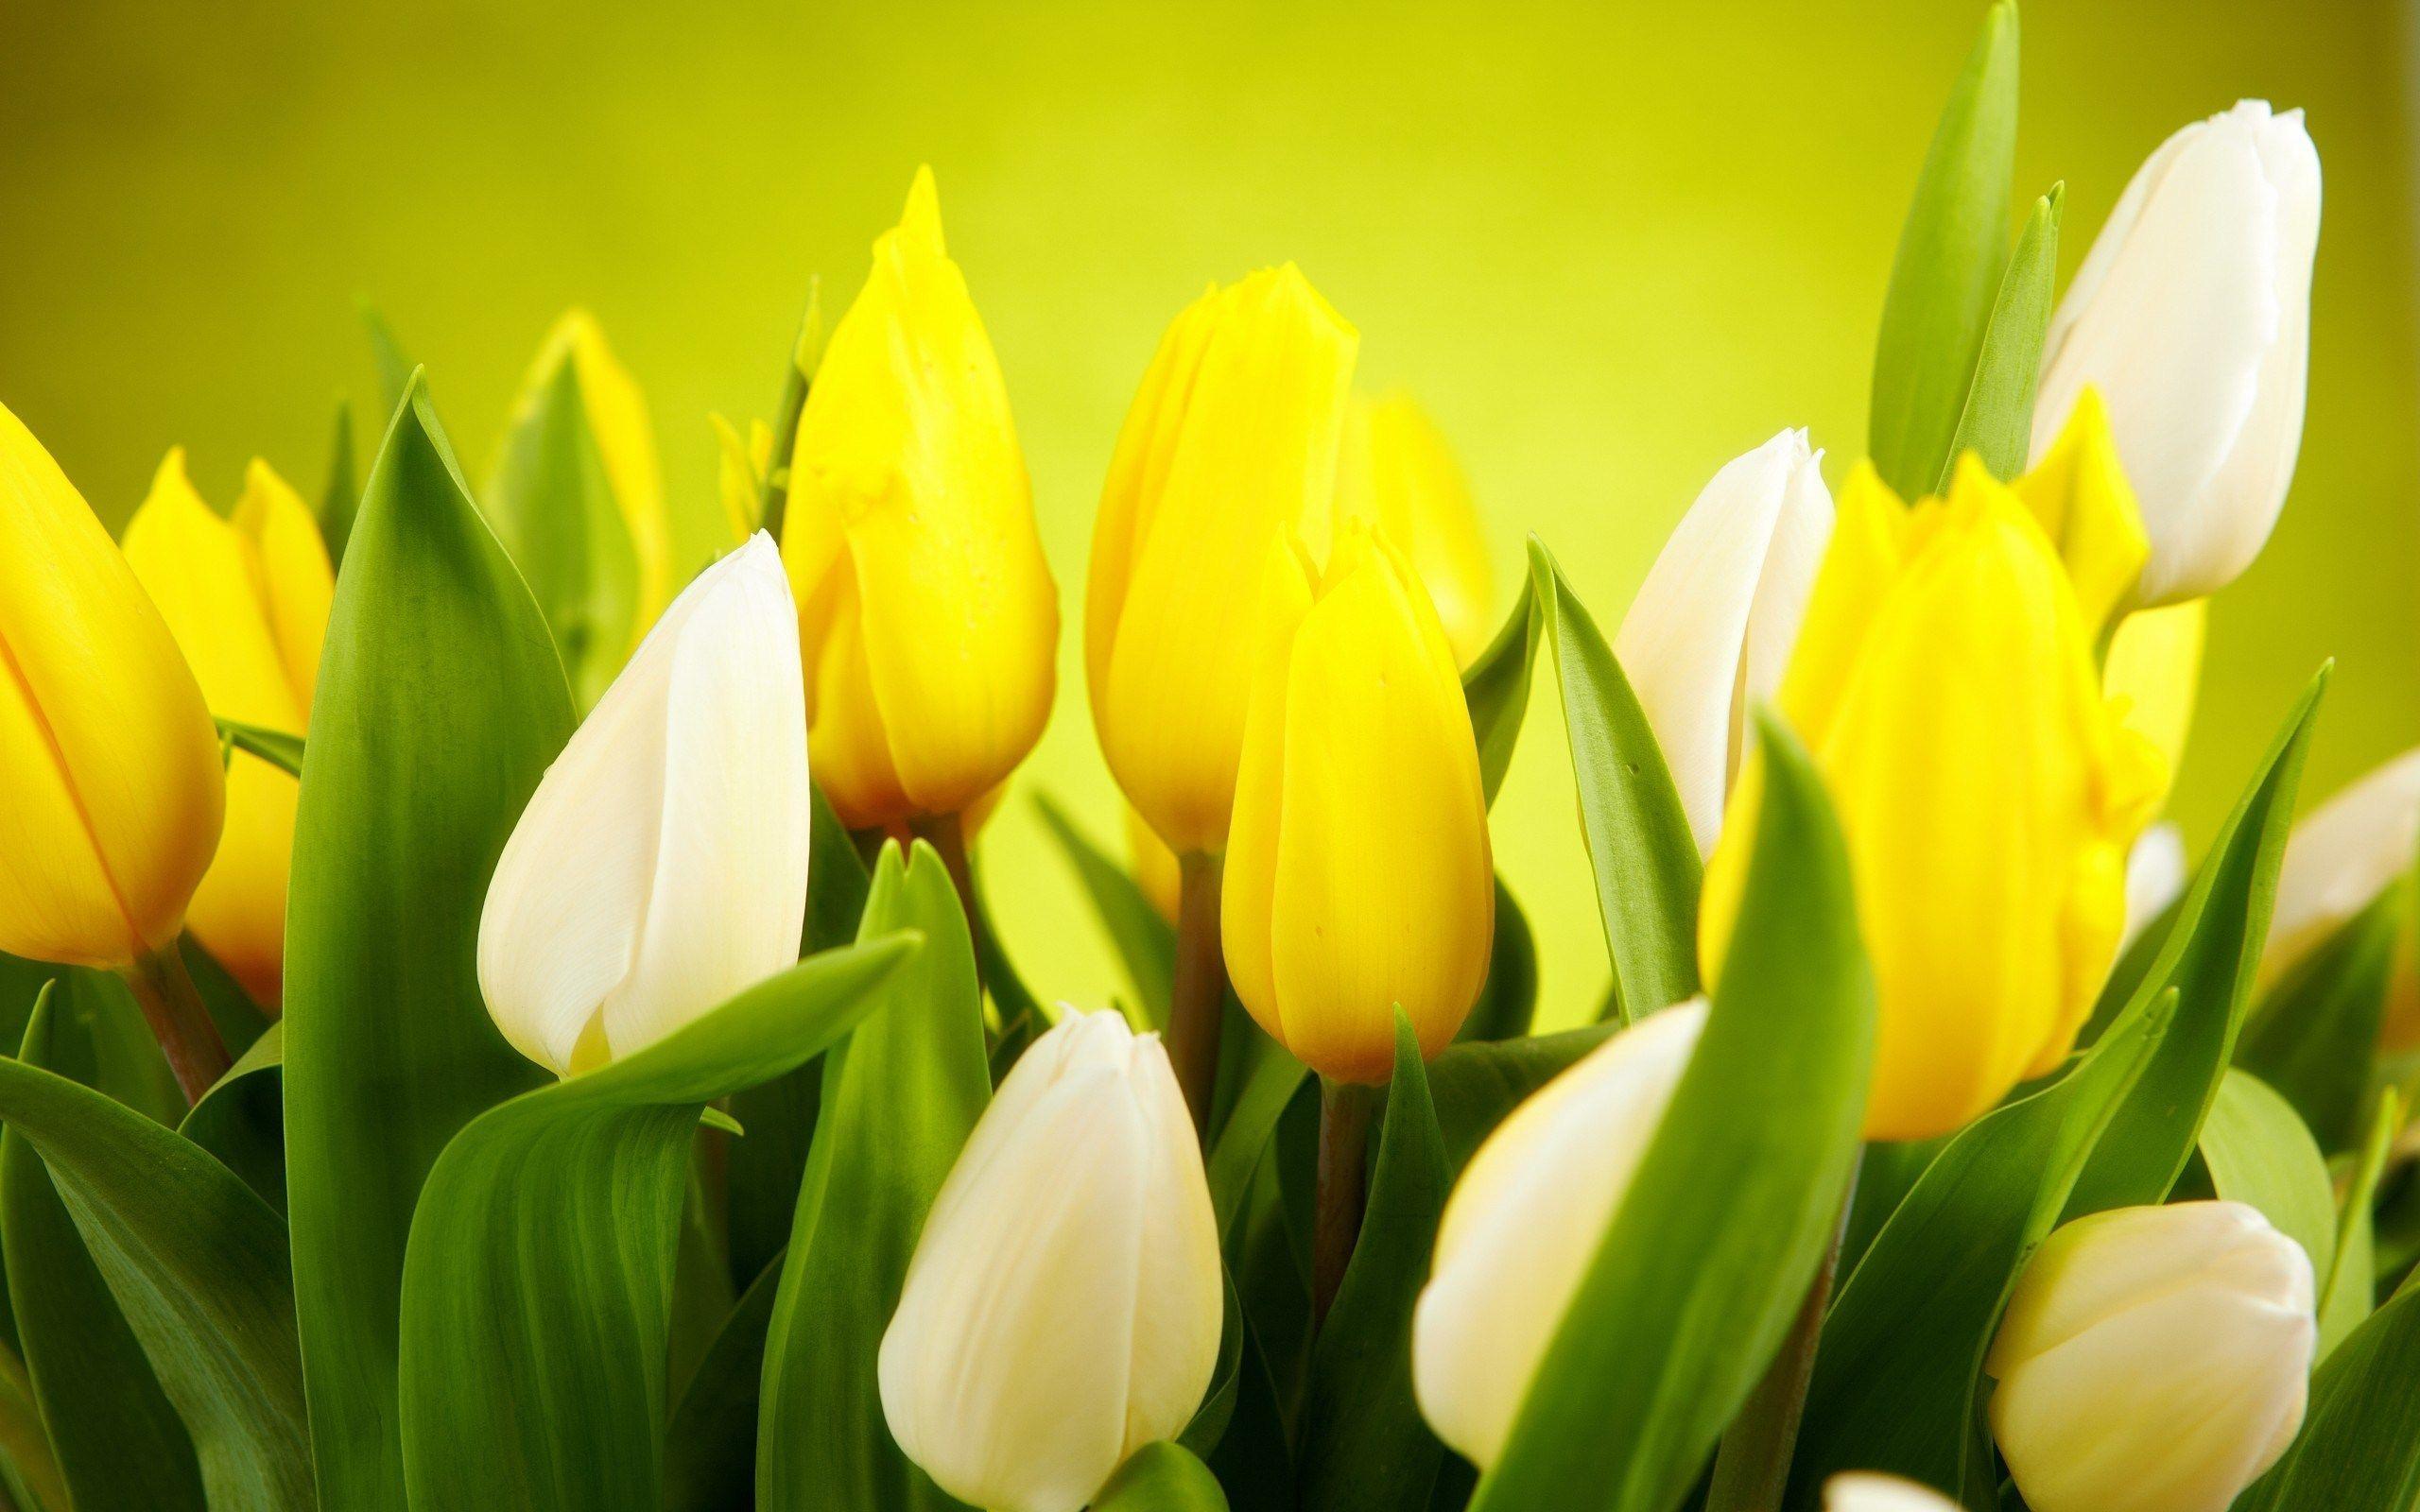 Yellow and White Flowers Wallpaper 16783 2560x1600 px